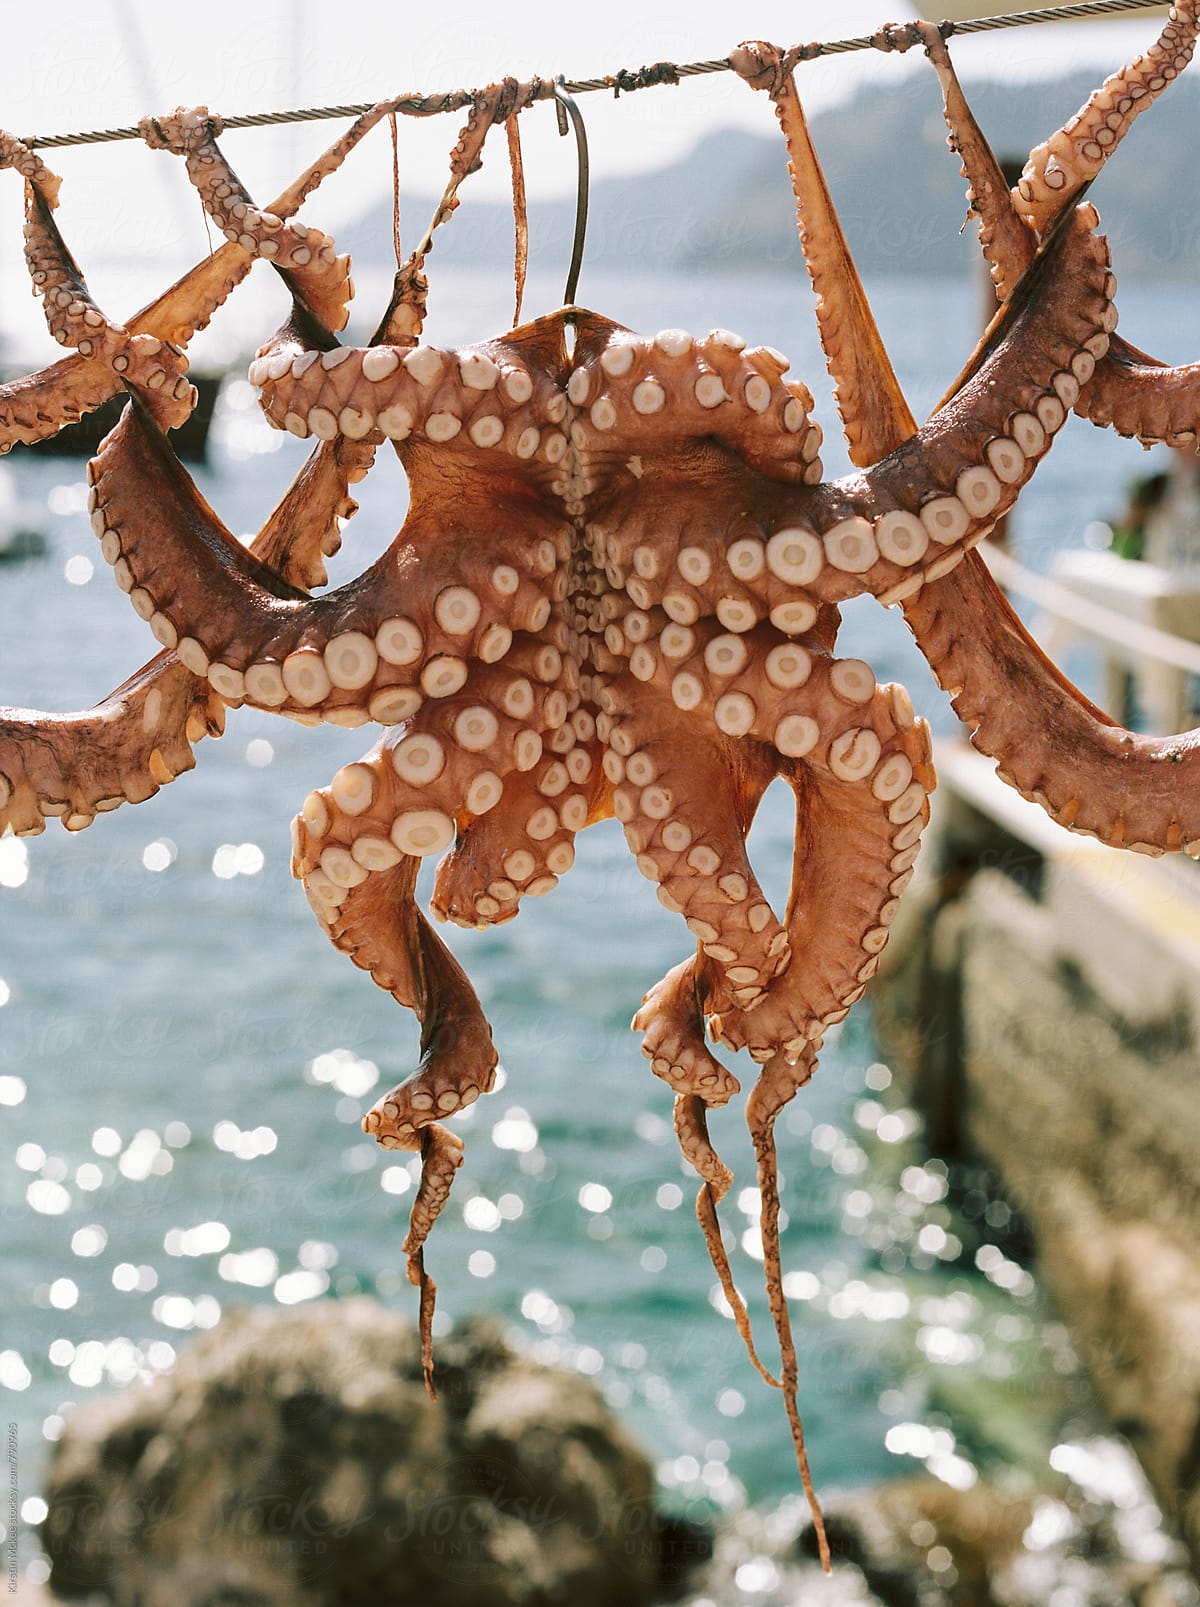 One octopus air drying on a line in Santorini, Greece